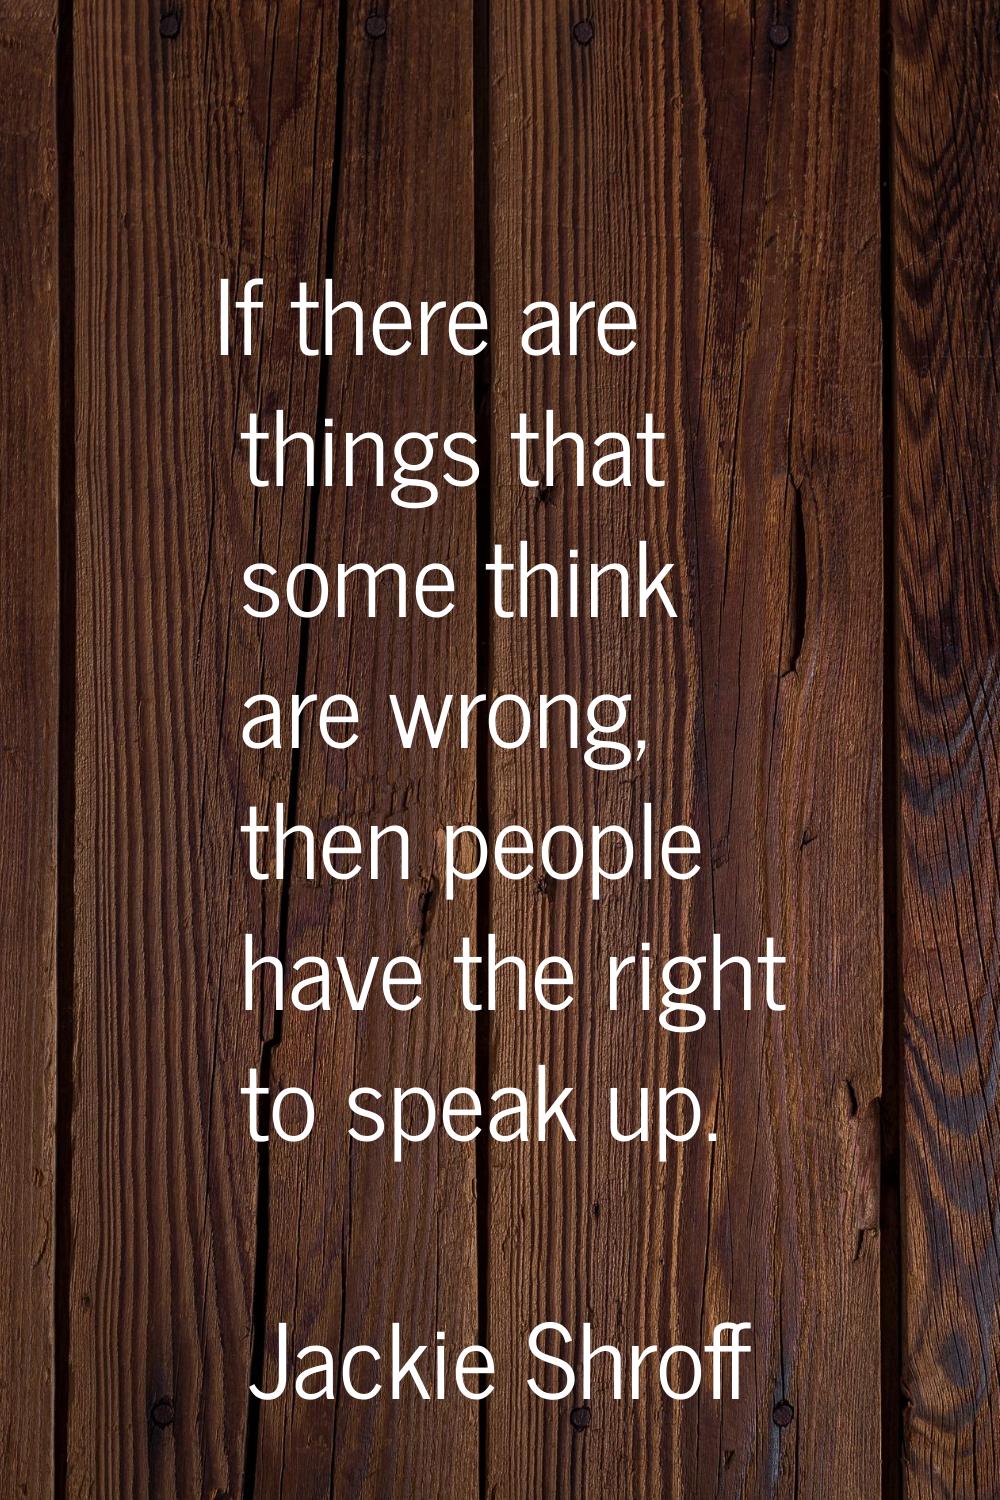 If there are things that some think are wrong, then people have the right to speak up.